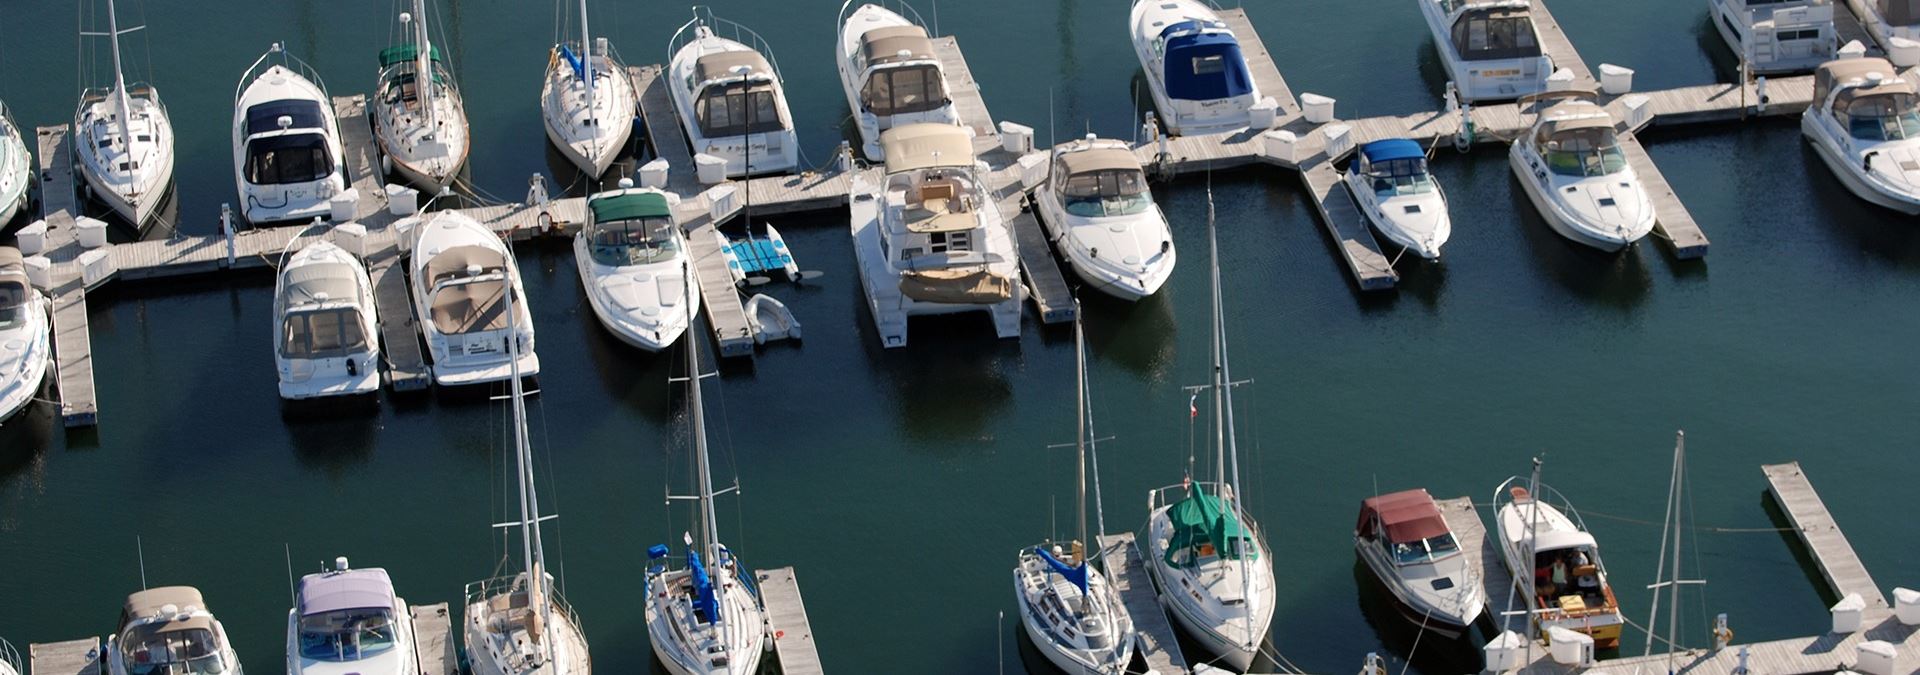 Sailboats docked in a marina from above.